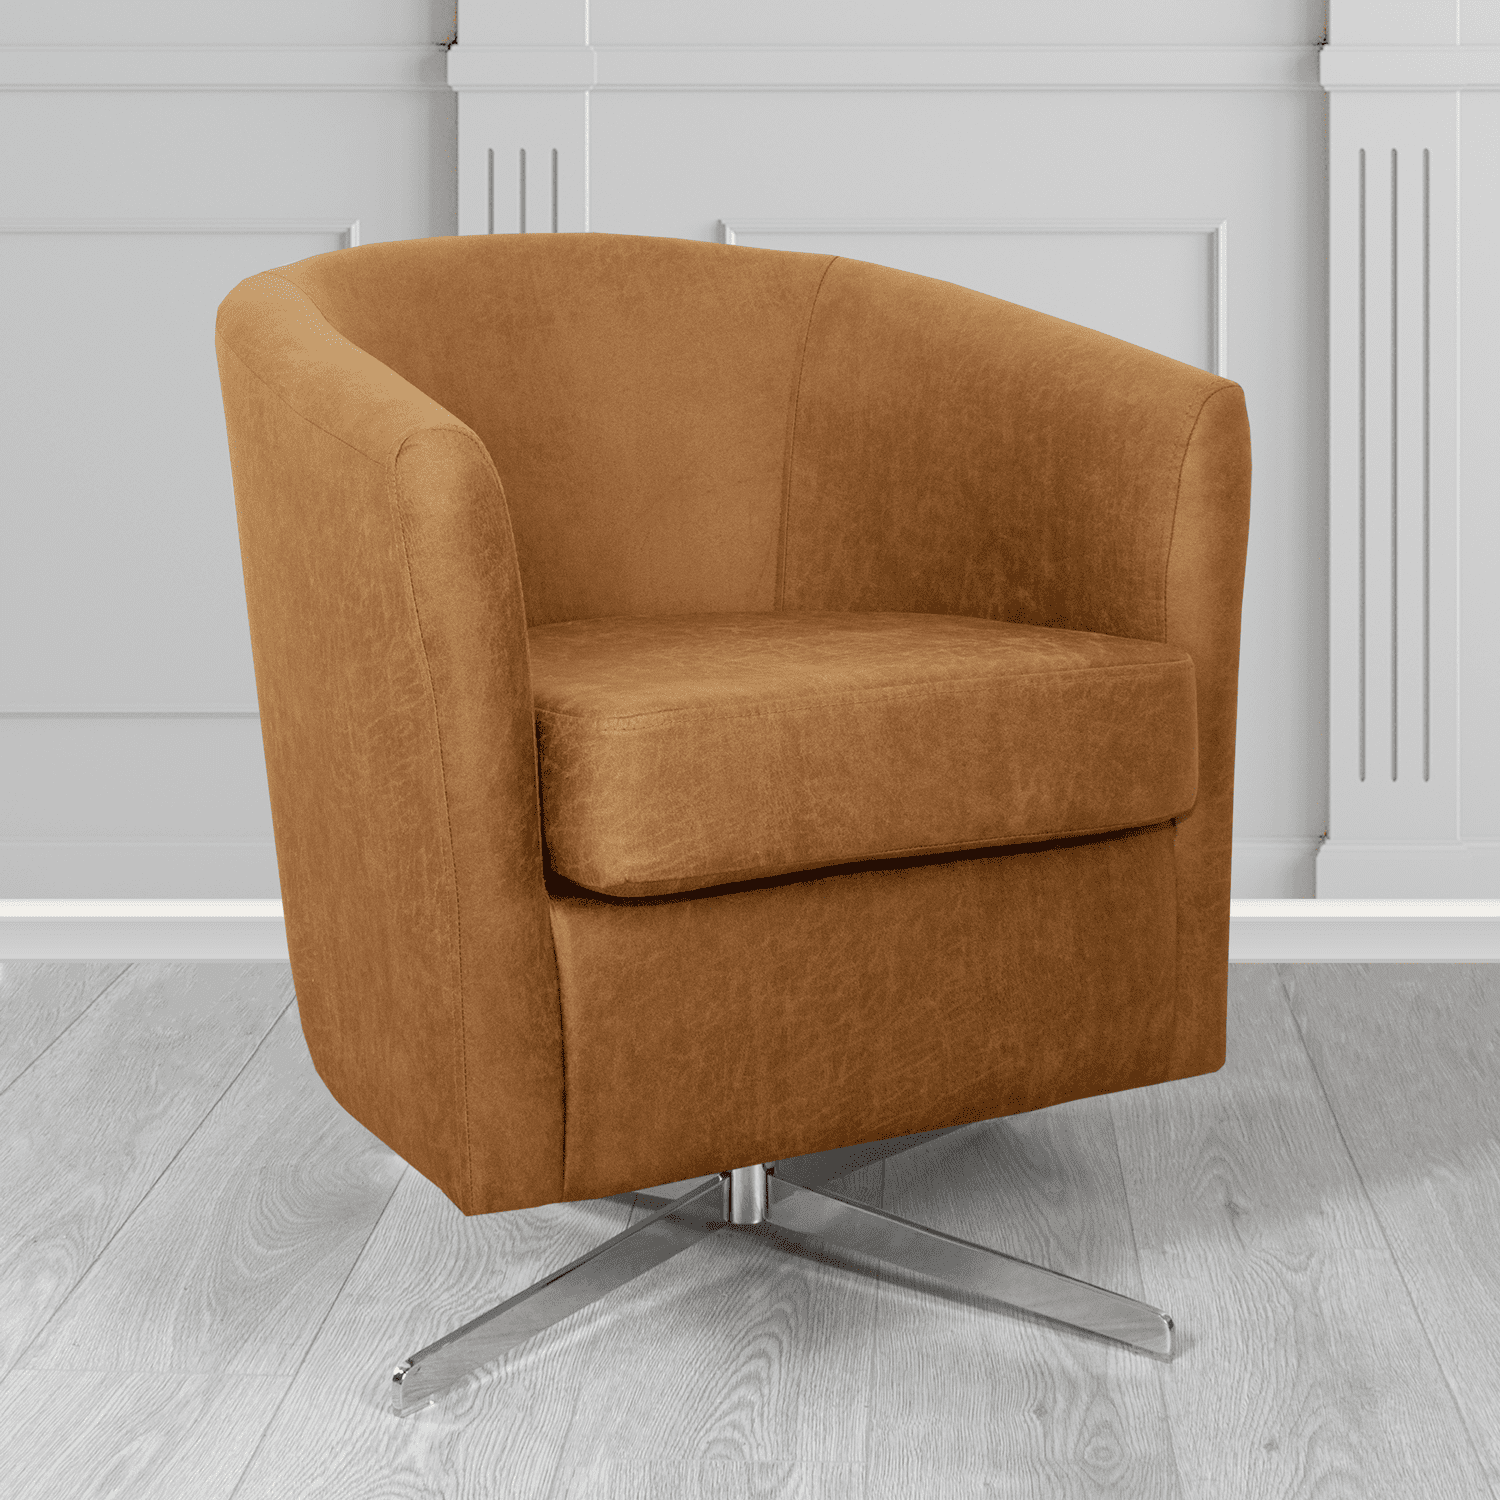 Cannes Swivel Tub Chair in Nevada Rust Faux Leather - The Tub Chair Shop